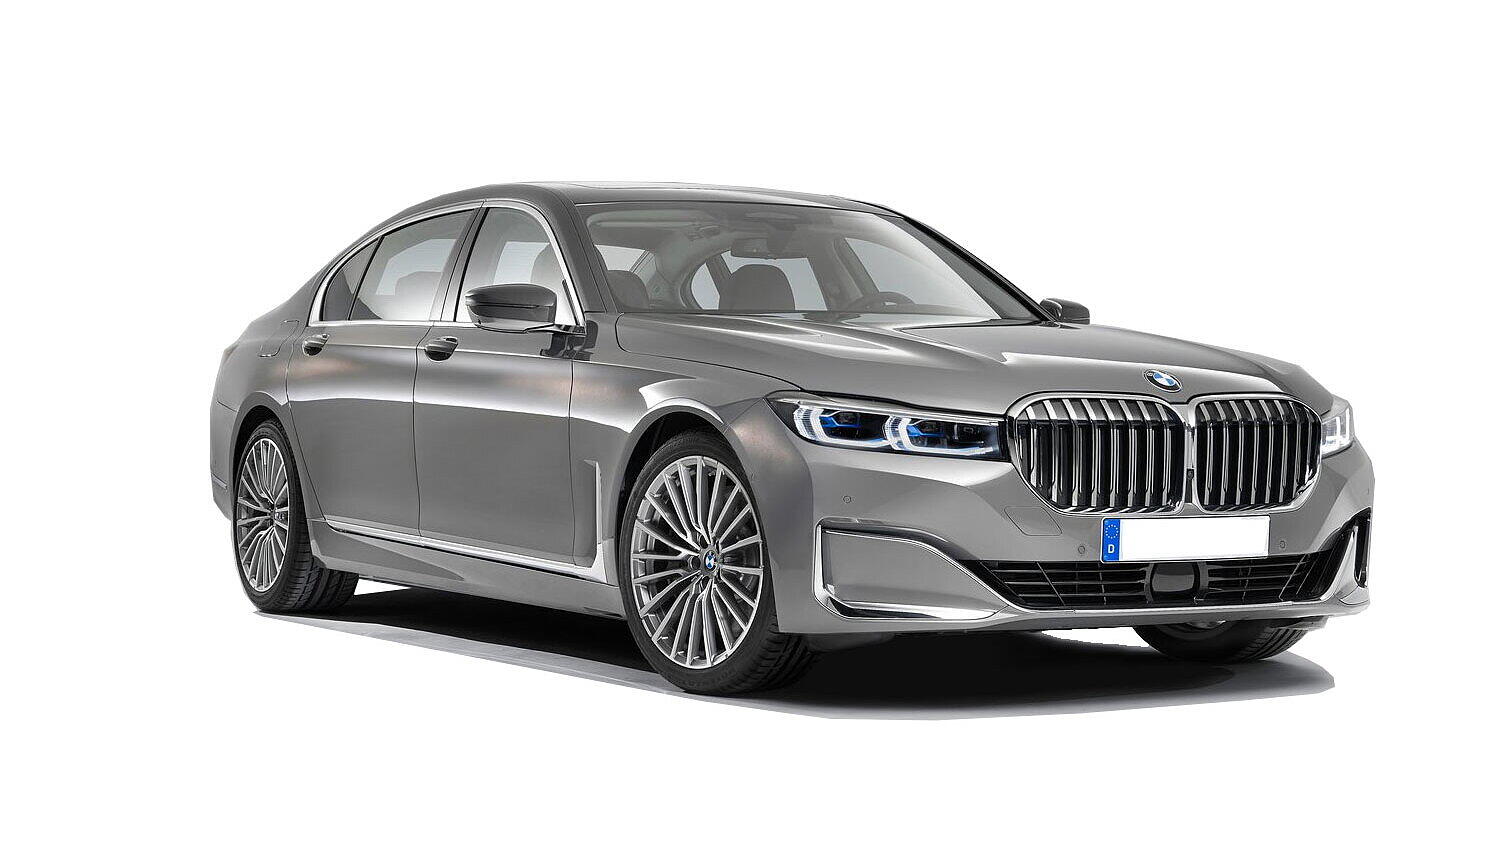 BMW 7 Series Images